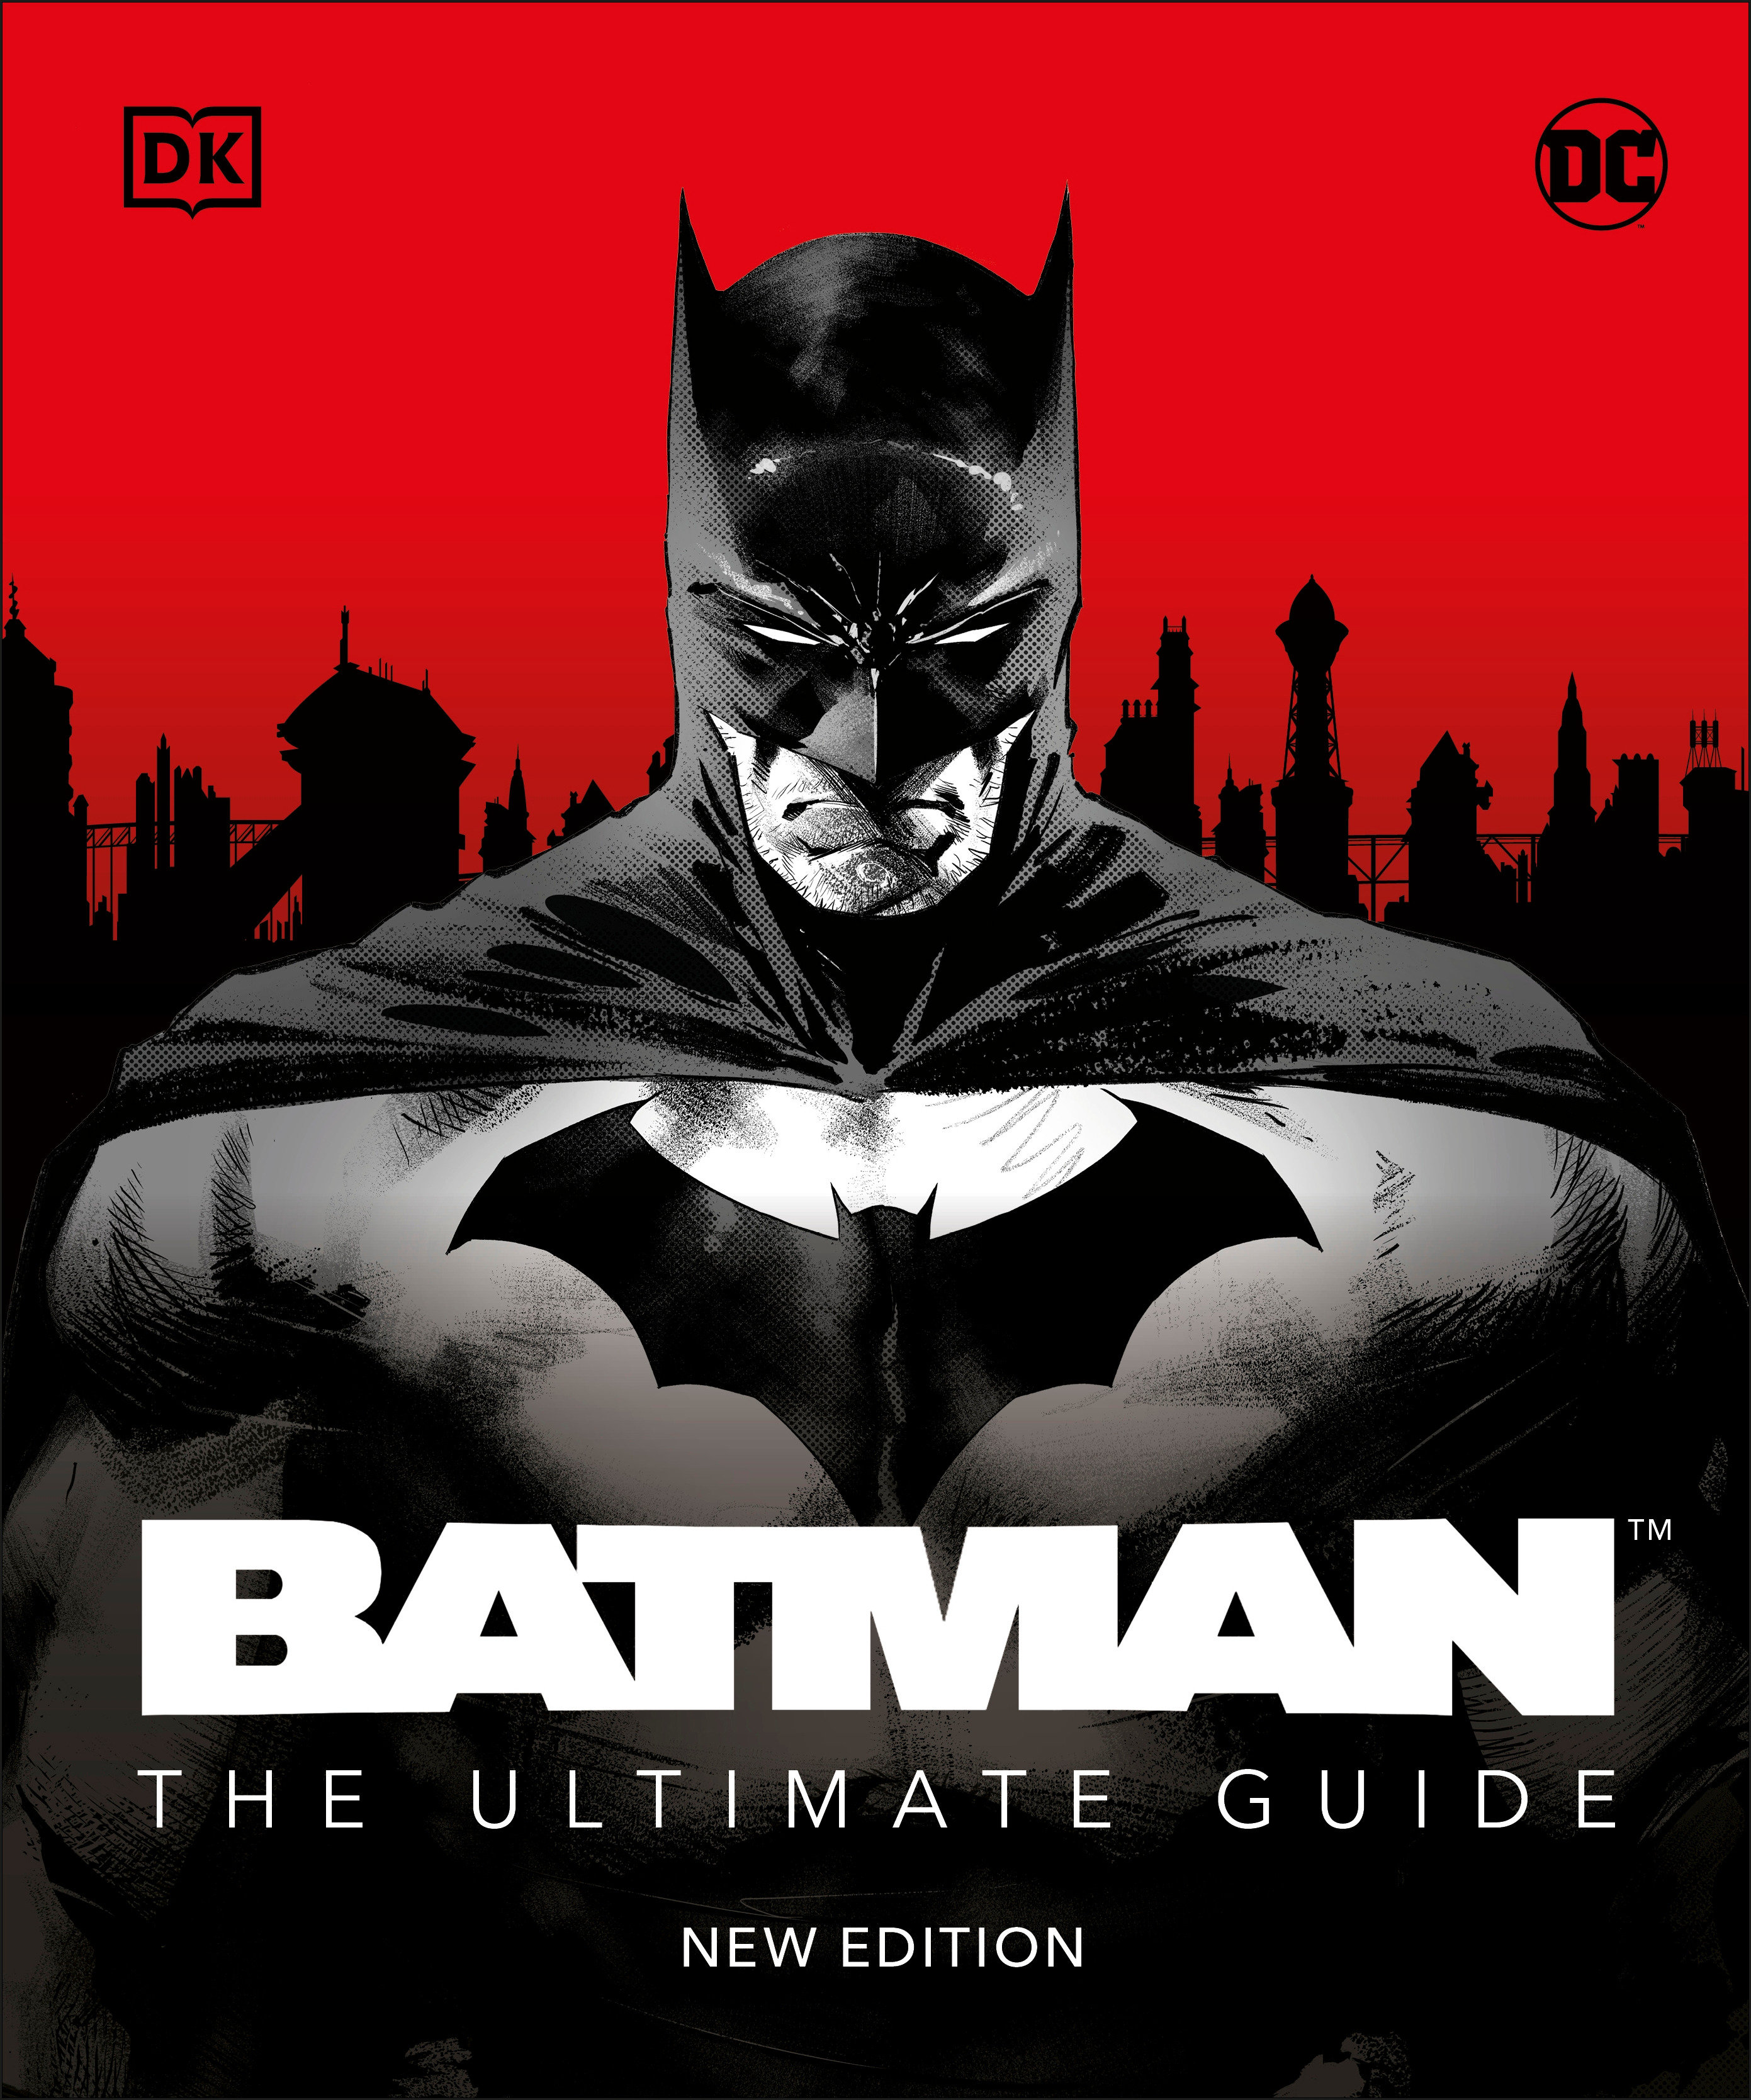 Batman Ultimate Guide Hardcover New Edition